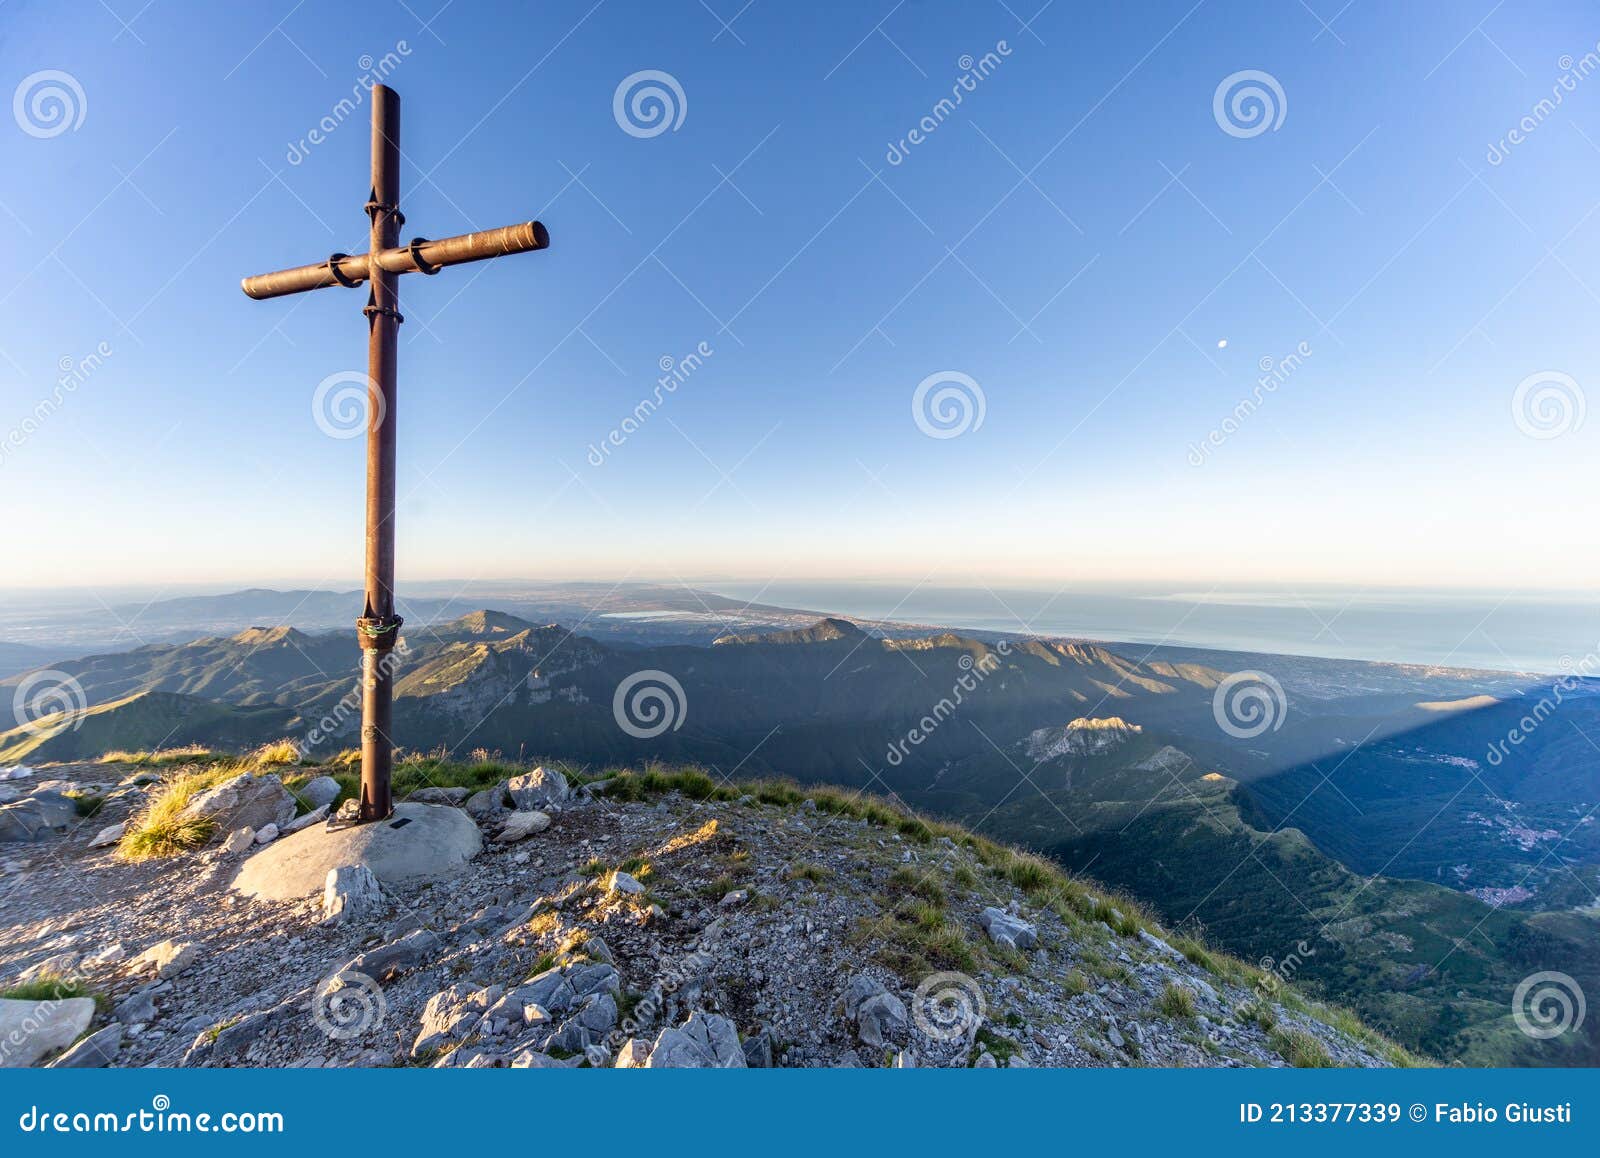 cross at sunrise on the summit of mountain peak of mount pania on the apuan alps alpi apuane, tuscany, lucca